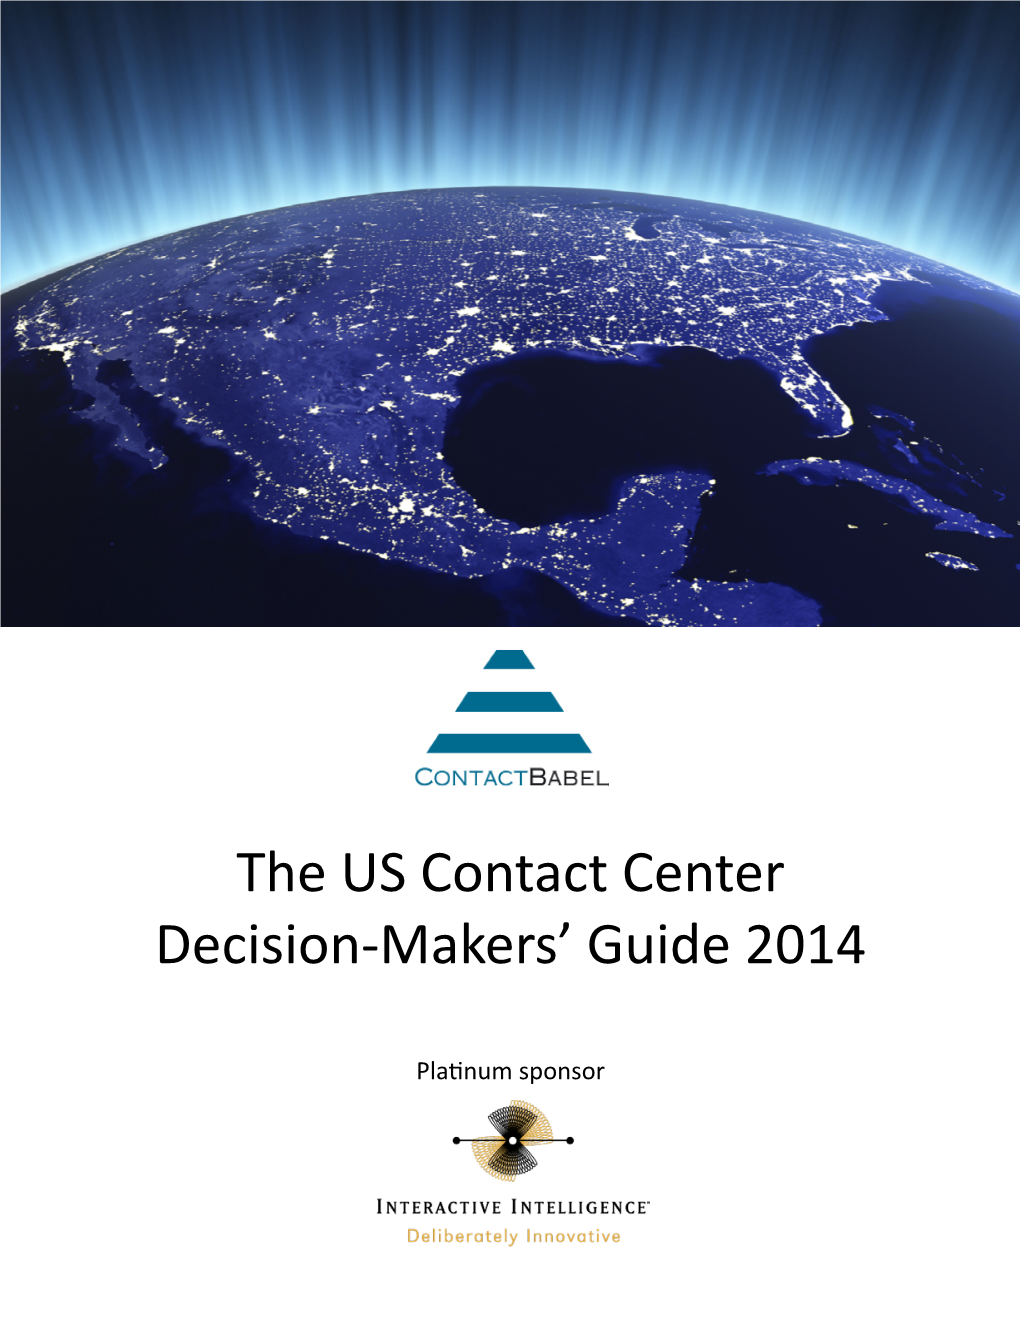 The 2014 US Contact Center Decision-Makers' Guide